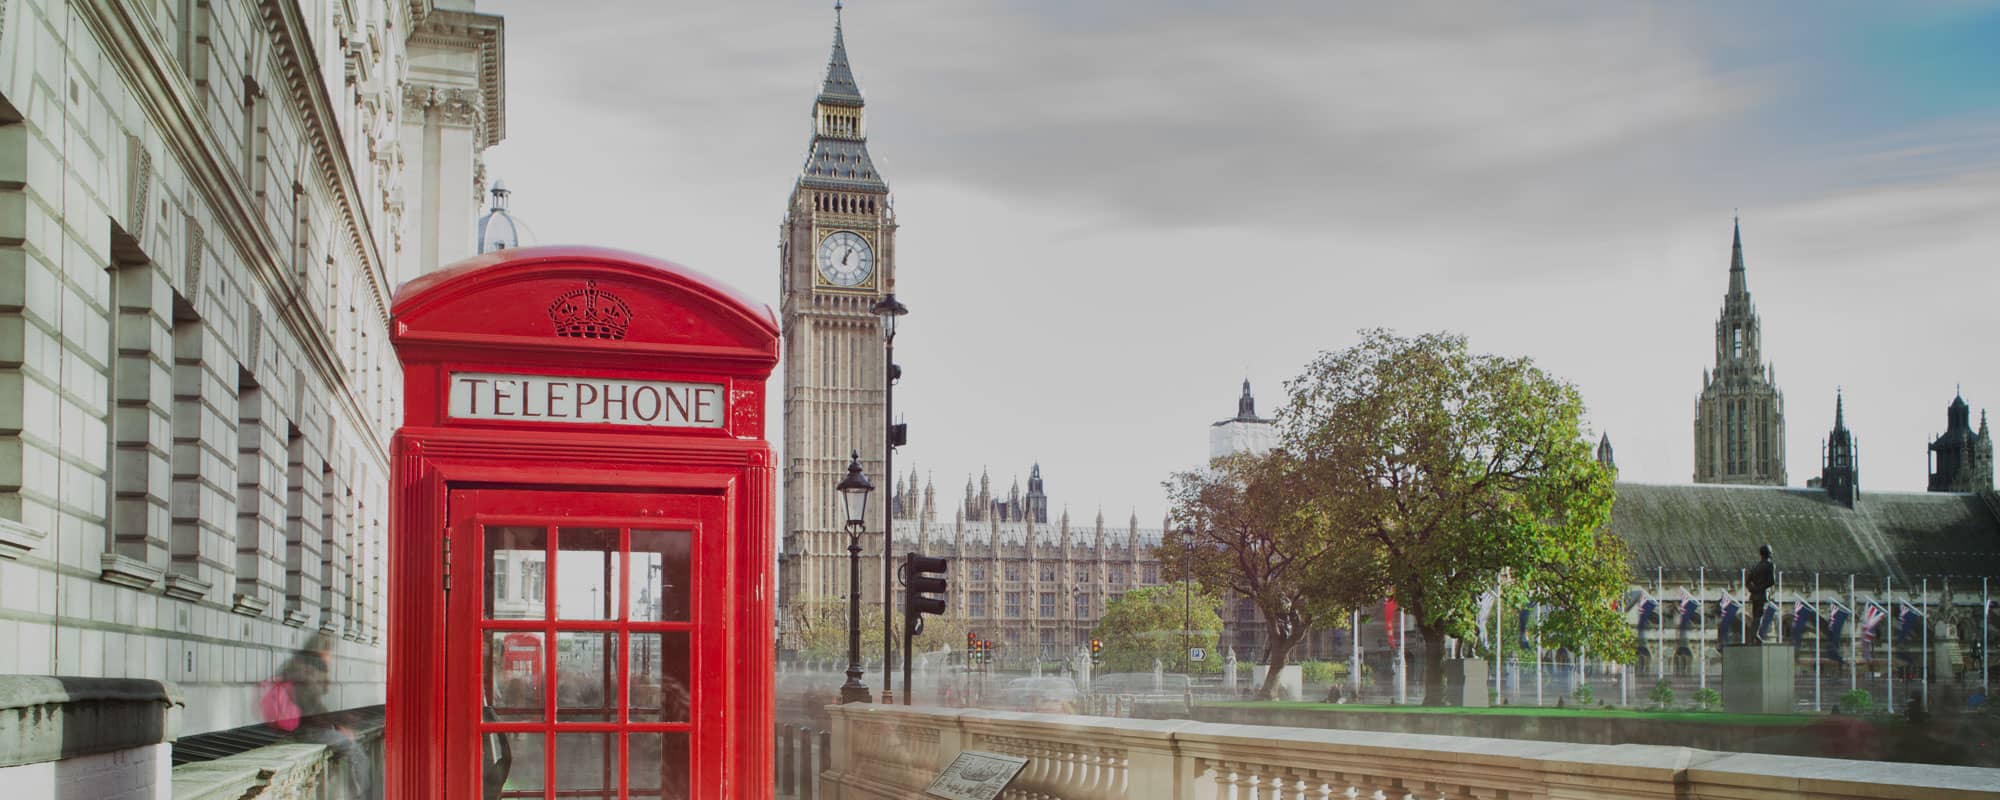 Red phone box in London with Big Ben in the background